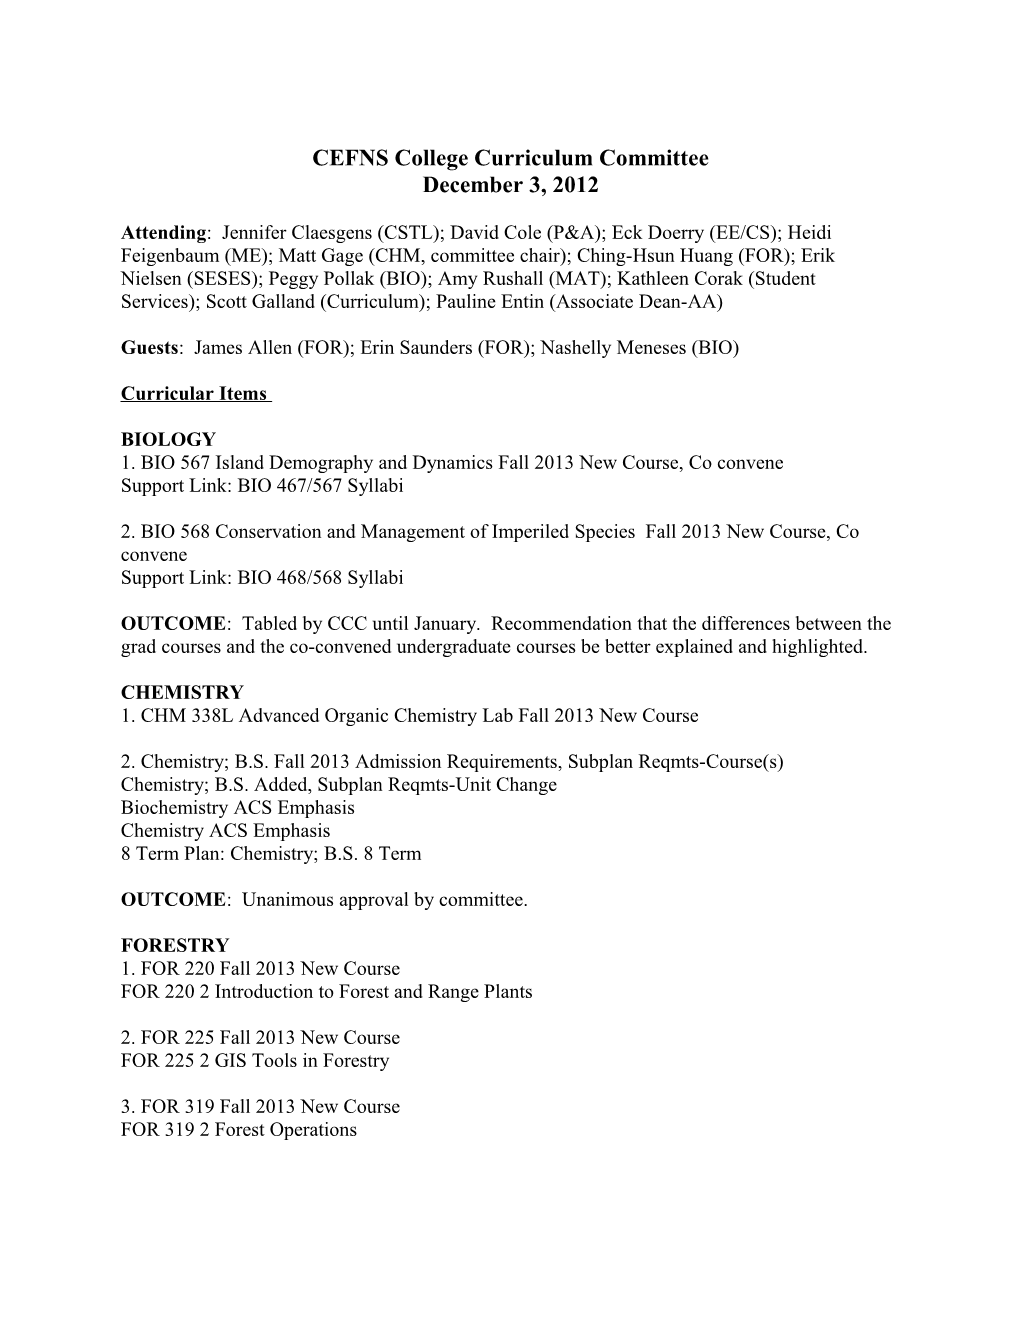 CEFNS College Curriculum Committee